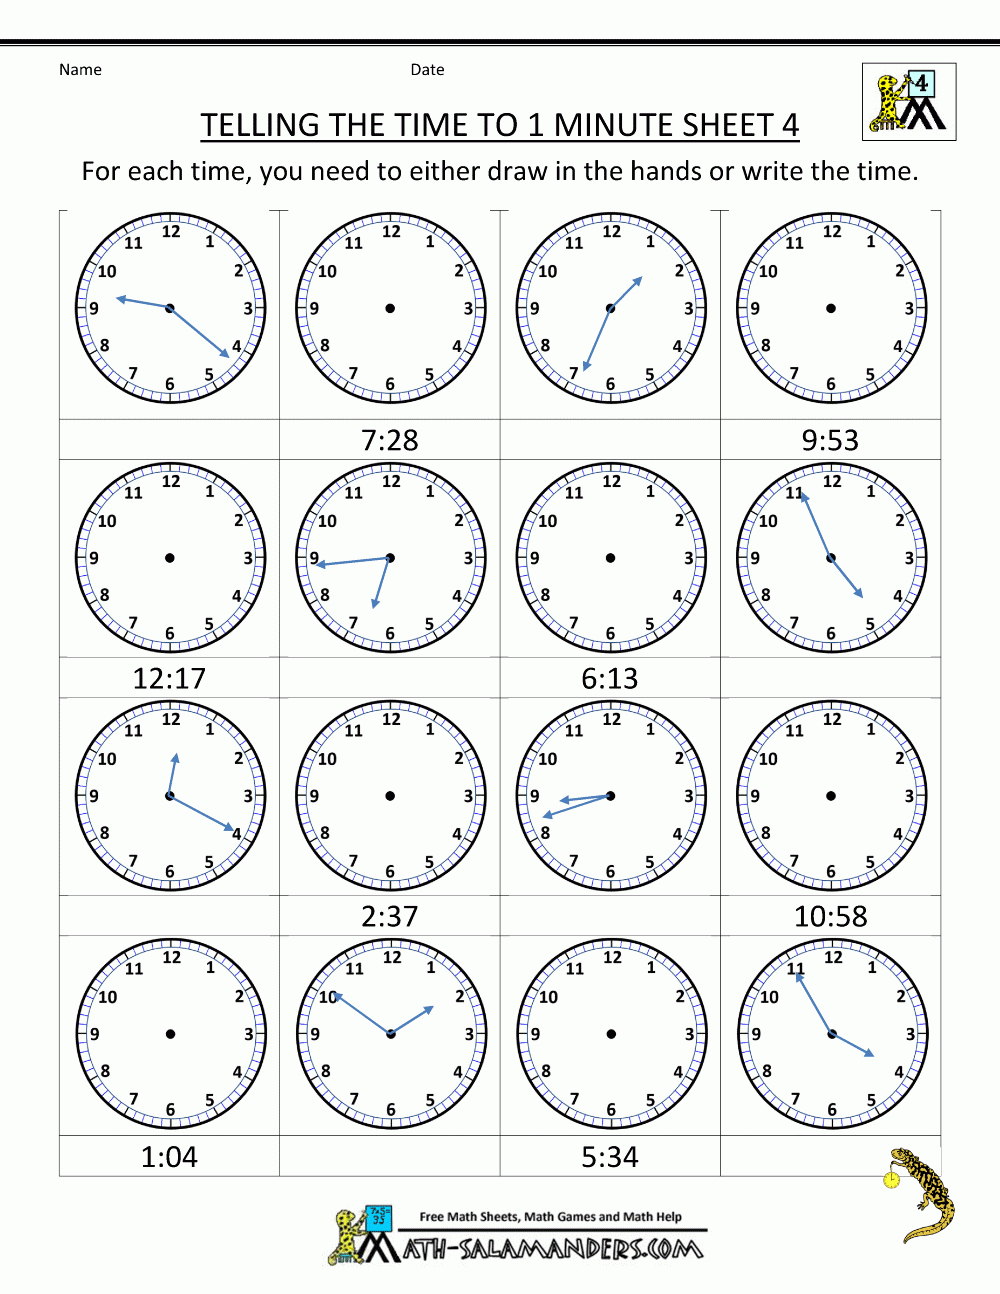 Printable Time Worksheets Telling The Time To 1 Min 4 | Worksheets - Free Printable Telling Time Worksheets